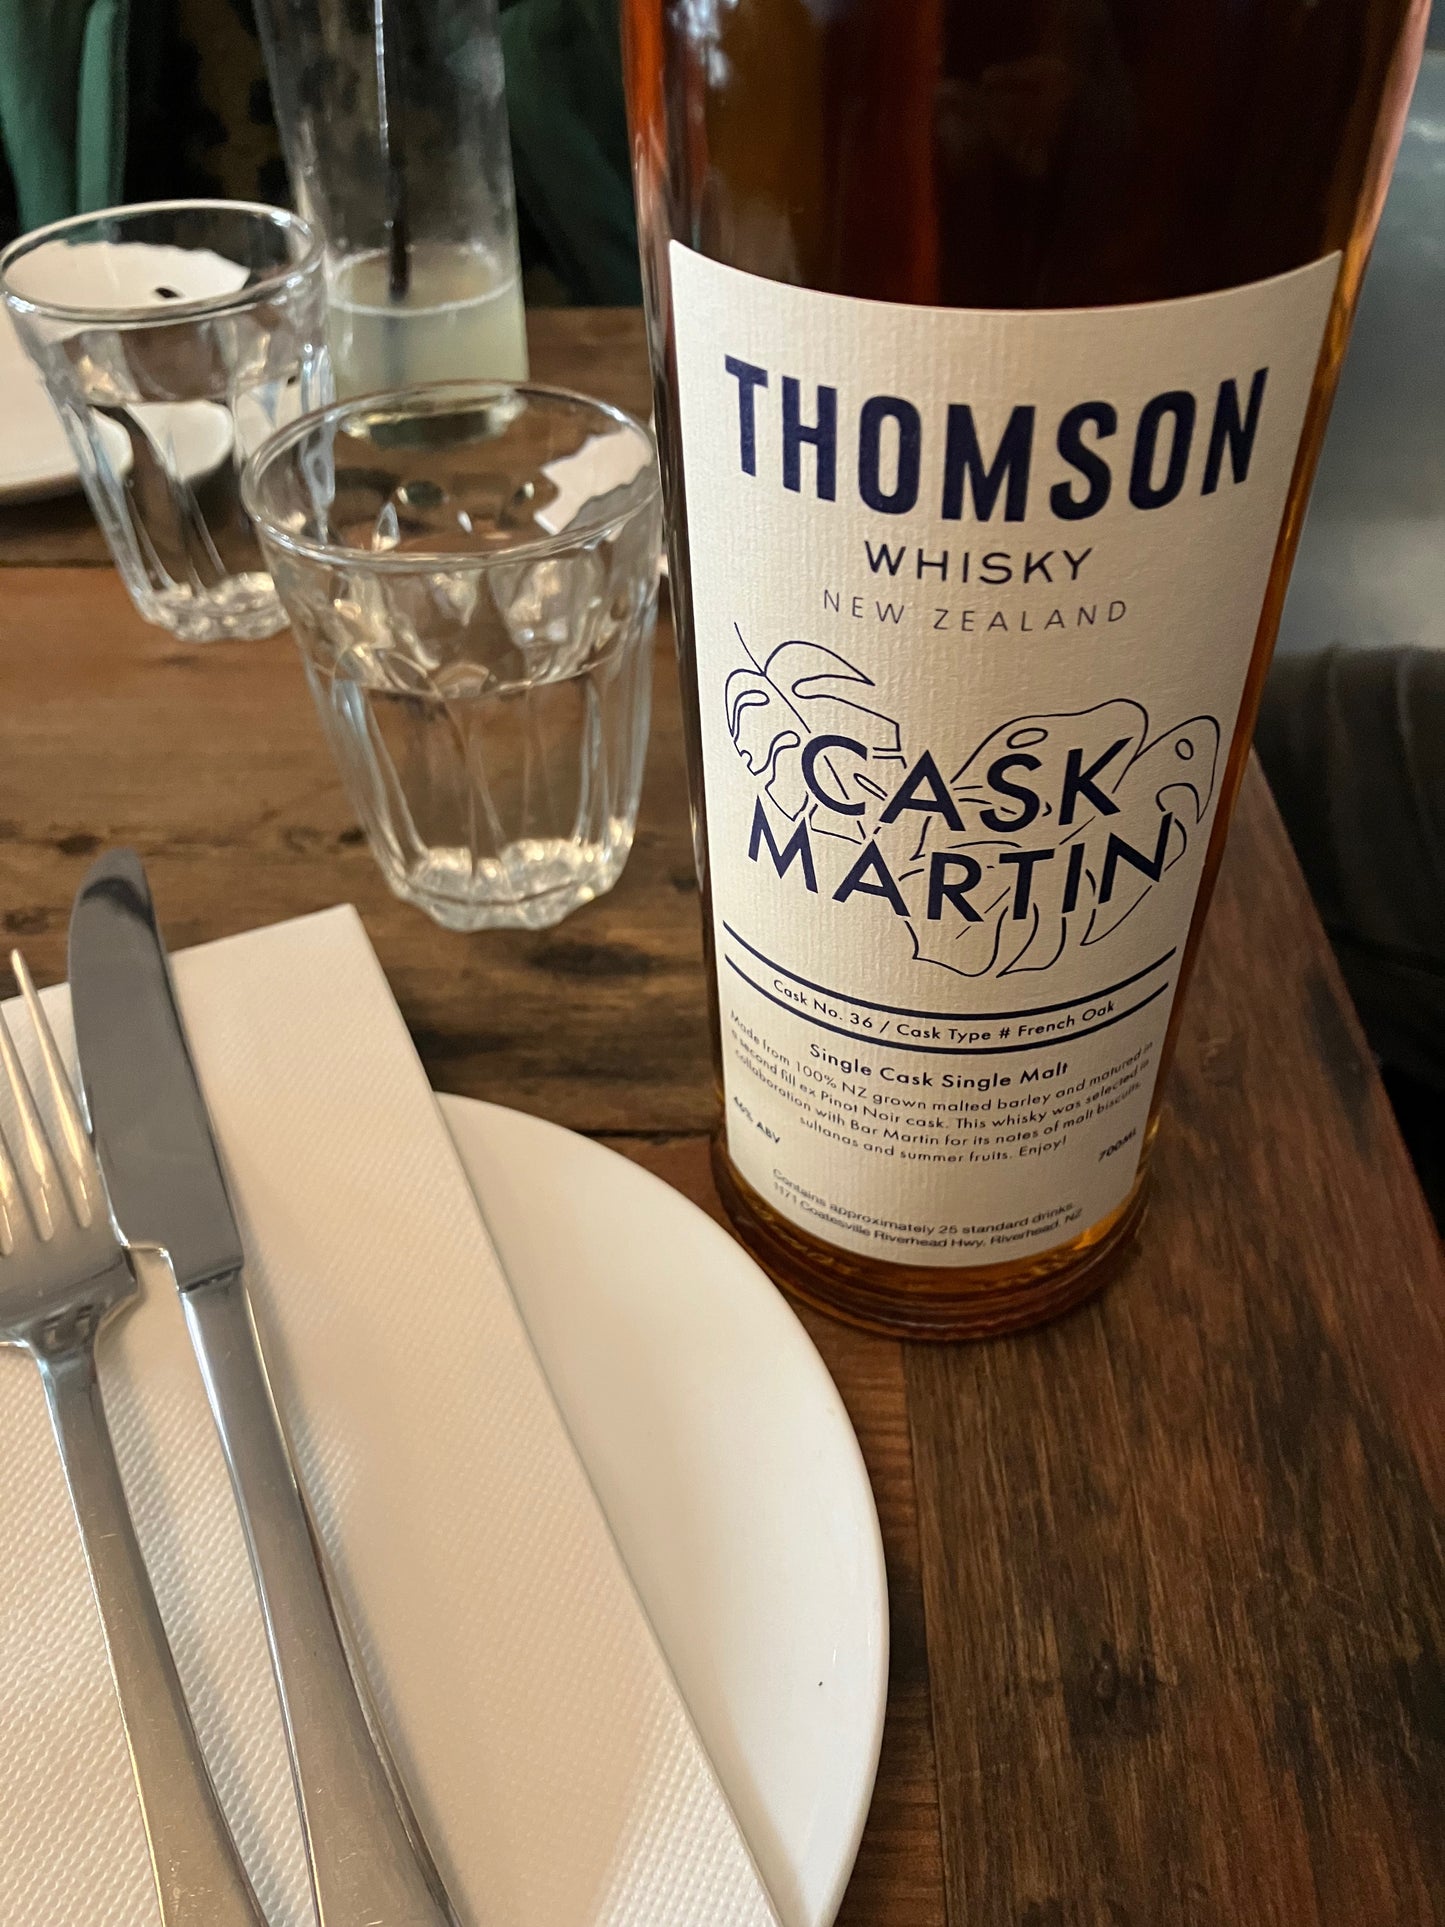 Cask Martin – Limited Edition Whisky